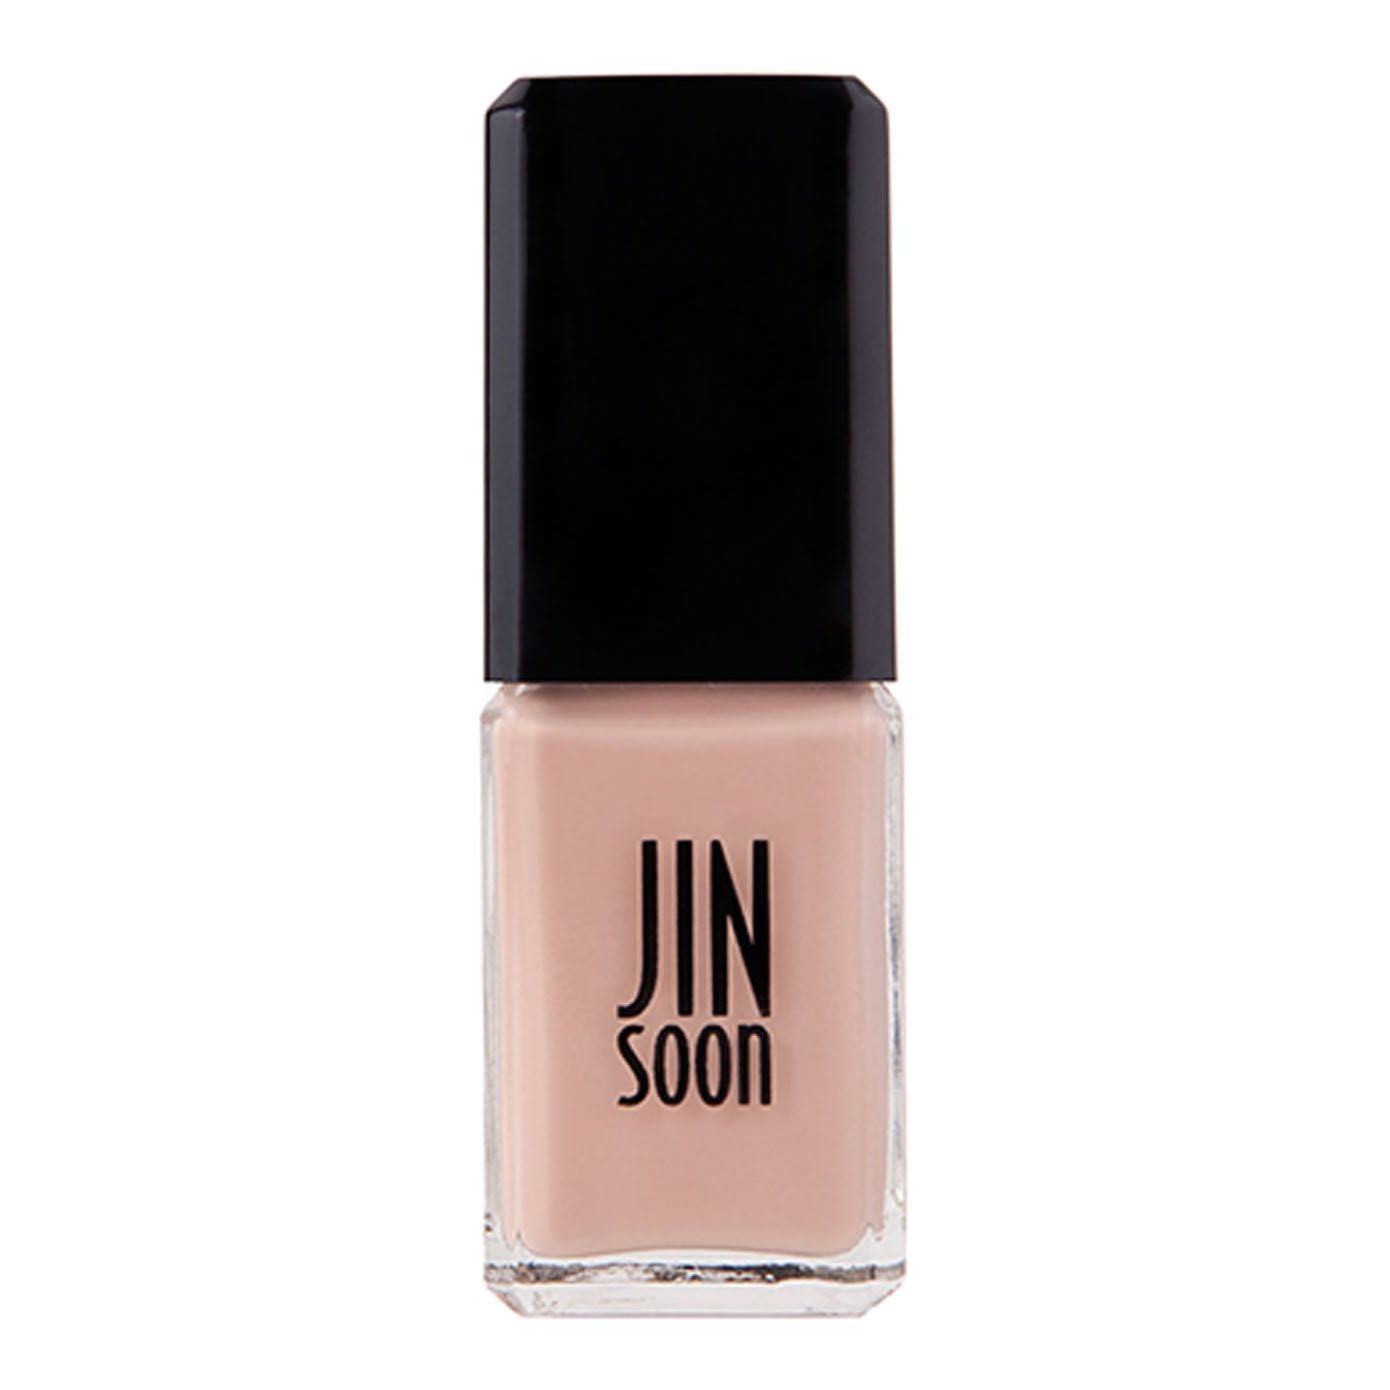 JinSoon Nail Lacquer in Nostalgia